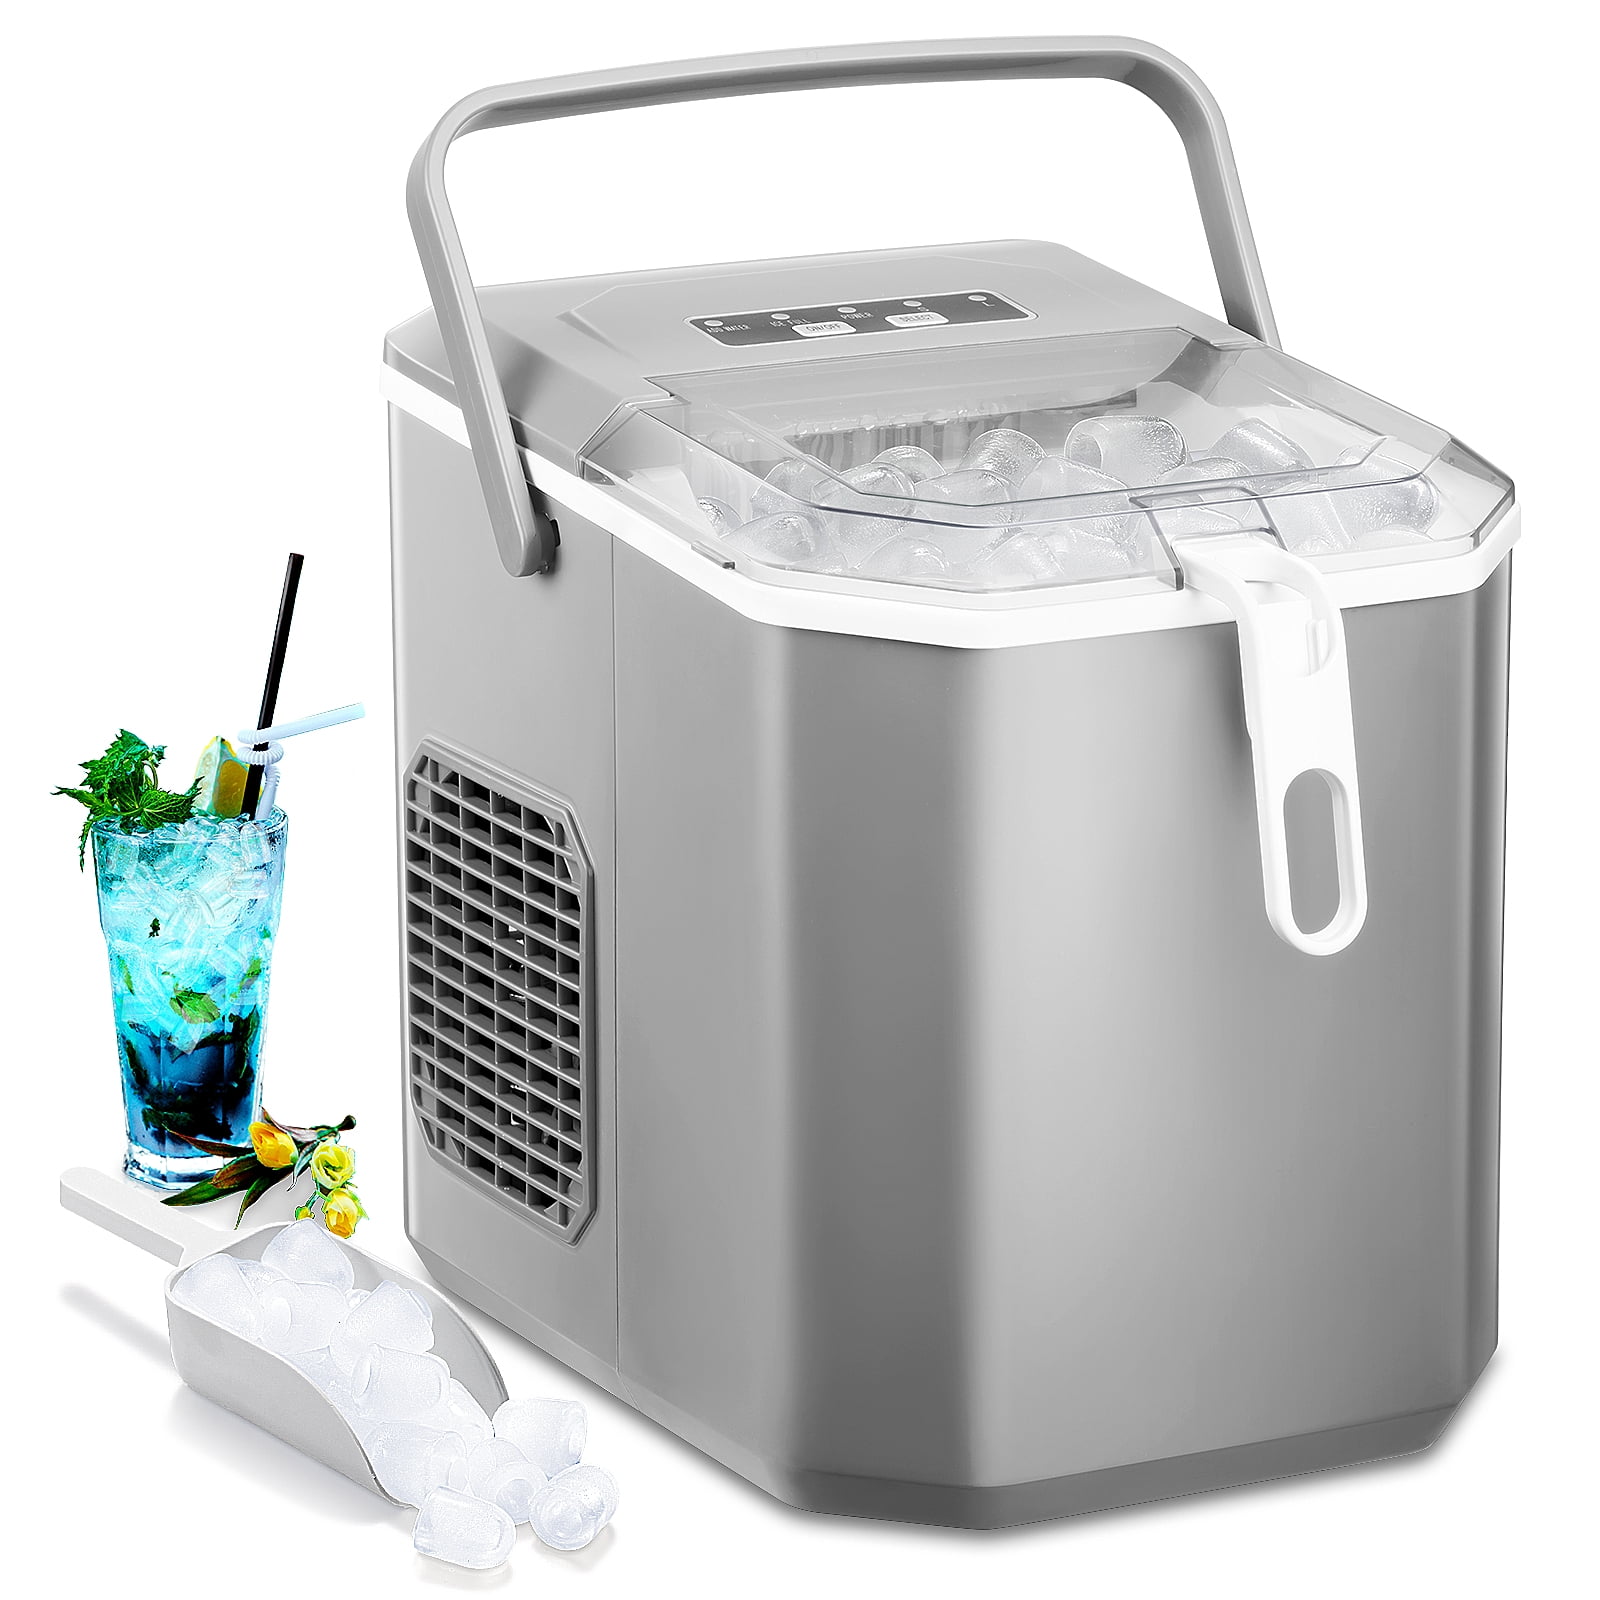  Kndko Ice Makers Countertop, 45Lbs,2-Way Add Water,Self  Cleaning Ice Maker, Ice Maker Machine,Ice Size Control,24H Timer,  Countertop Ice Maker for Home Party Bar RV,Stainless Steel Ice Machine :  Appliances